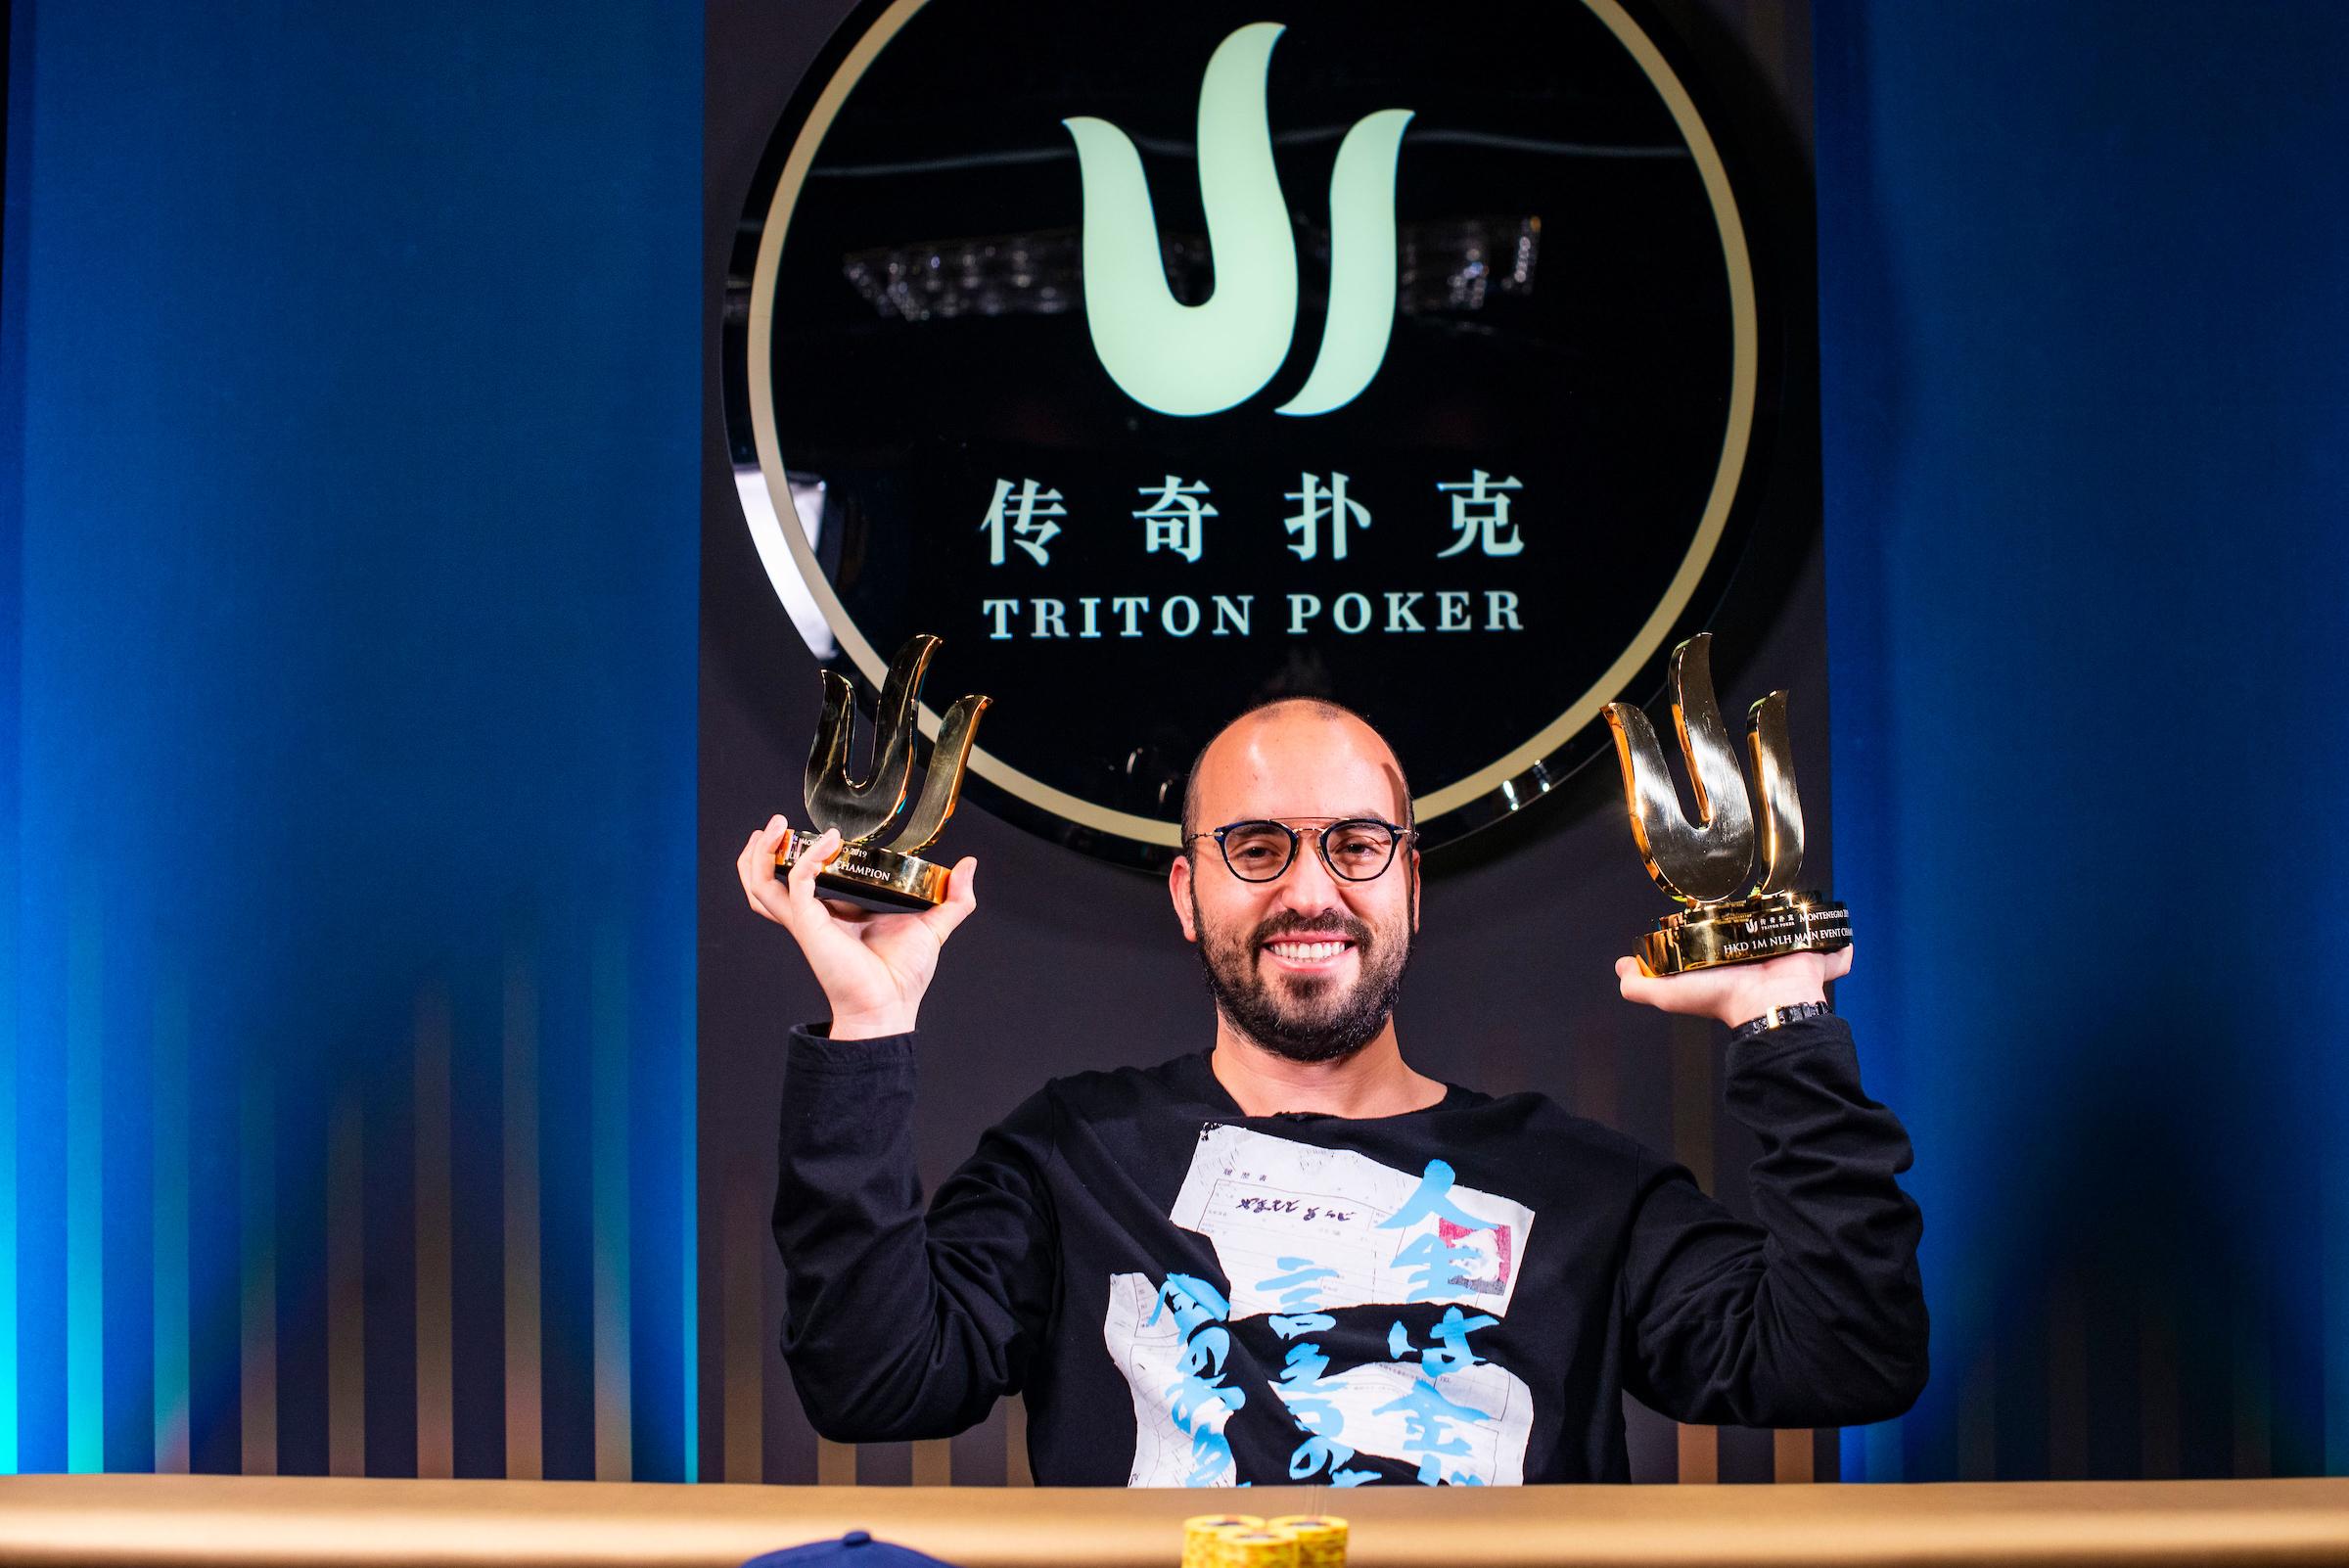 Bryn Kenney wins Triton Series Montenegro 2019 Main Event, Danny Tang runner-up